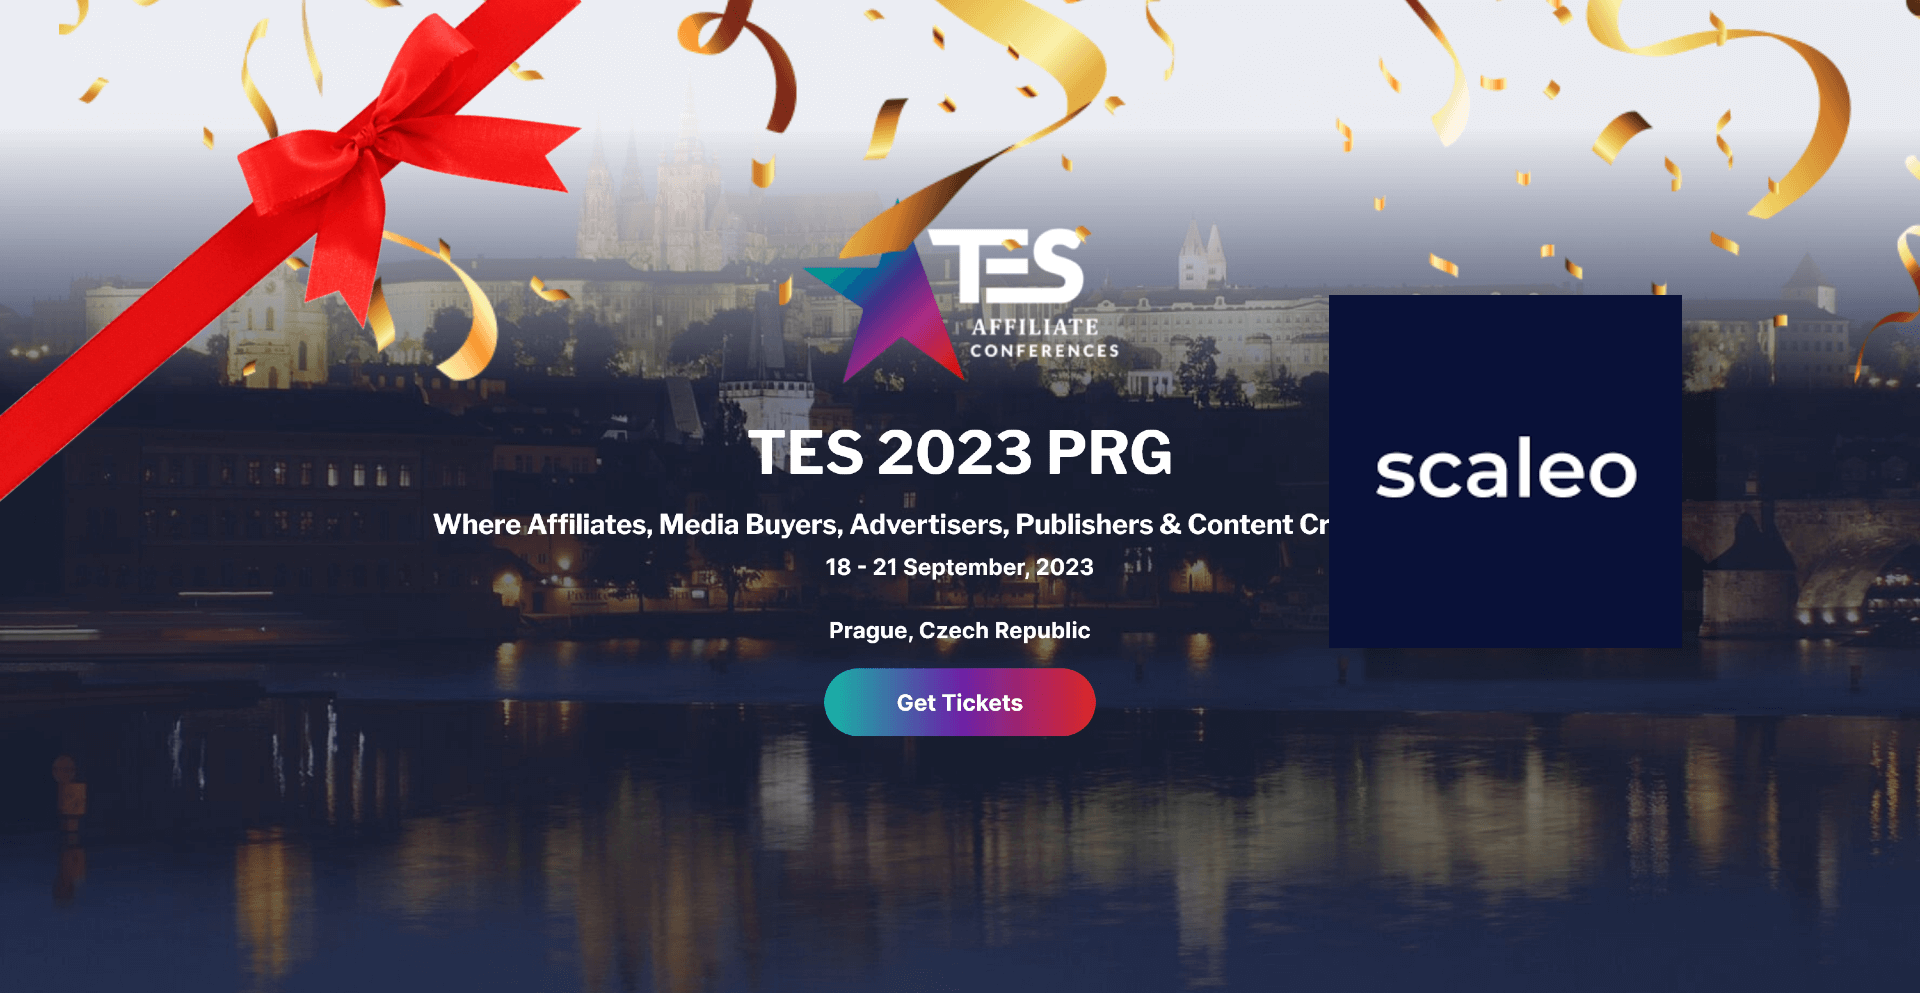 Meet Us at The TES Affiliate Conference in Prague -